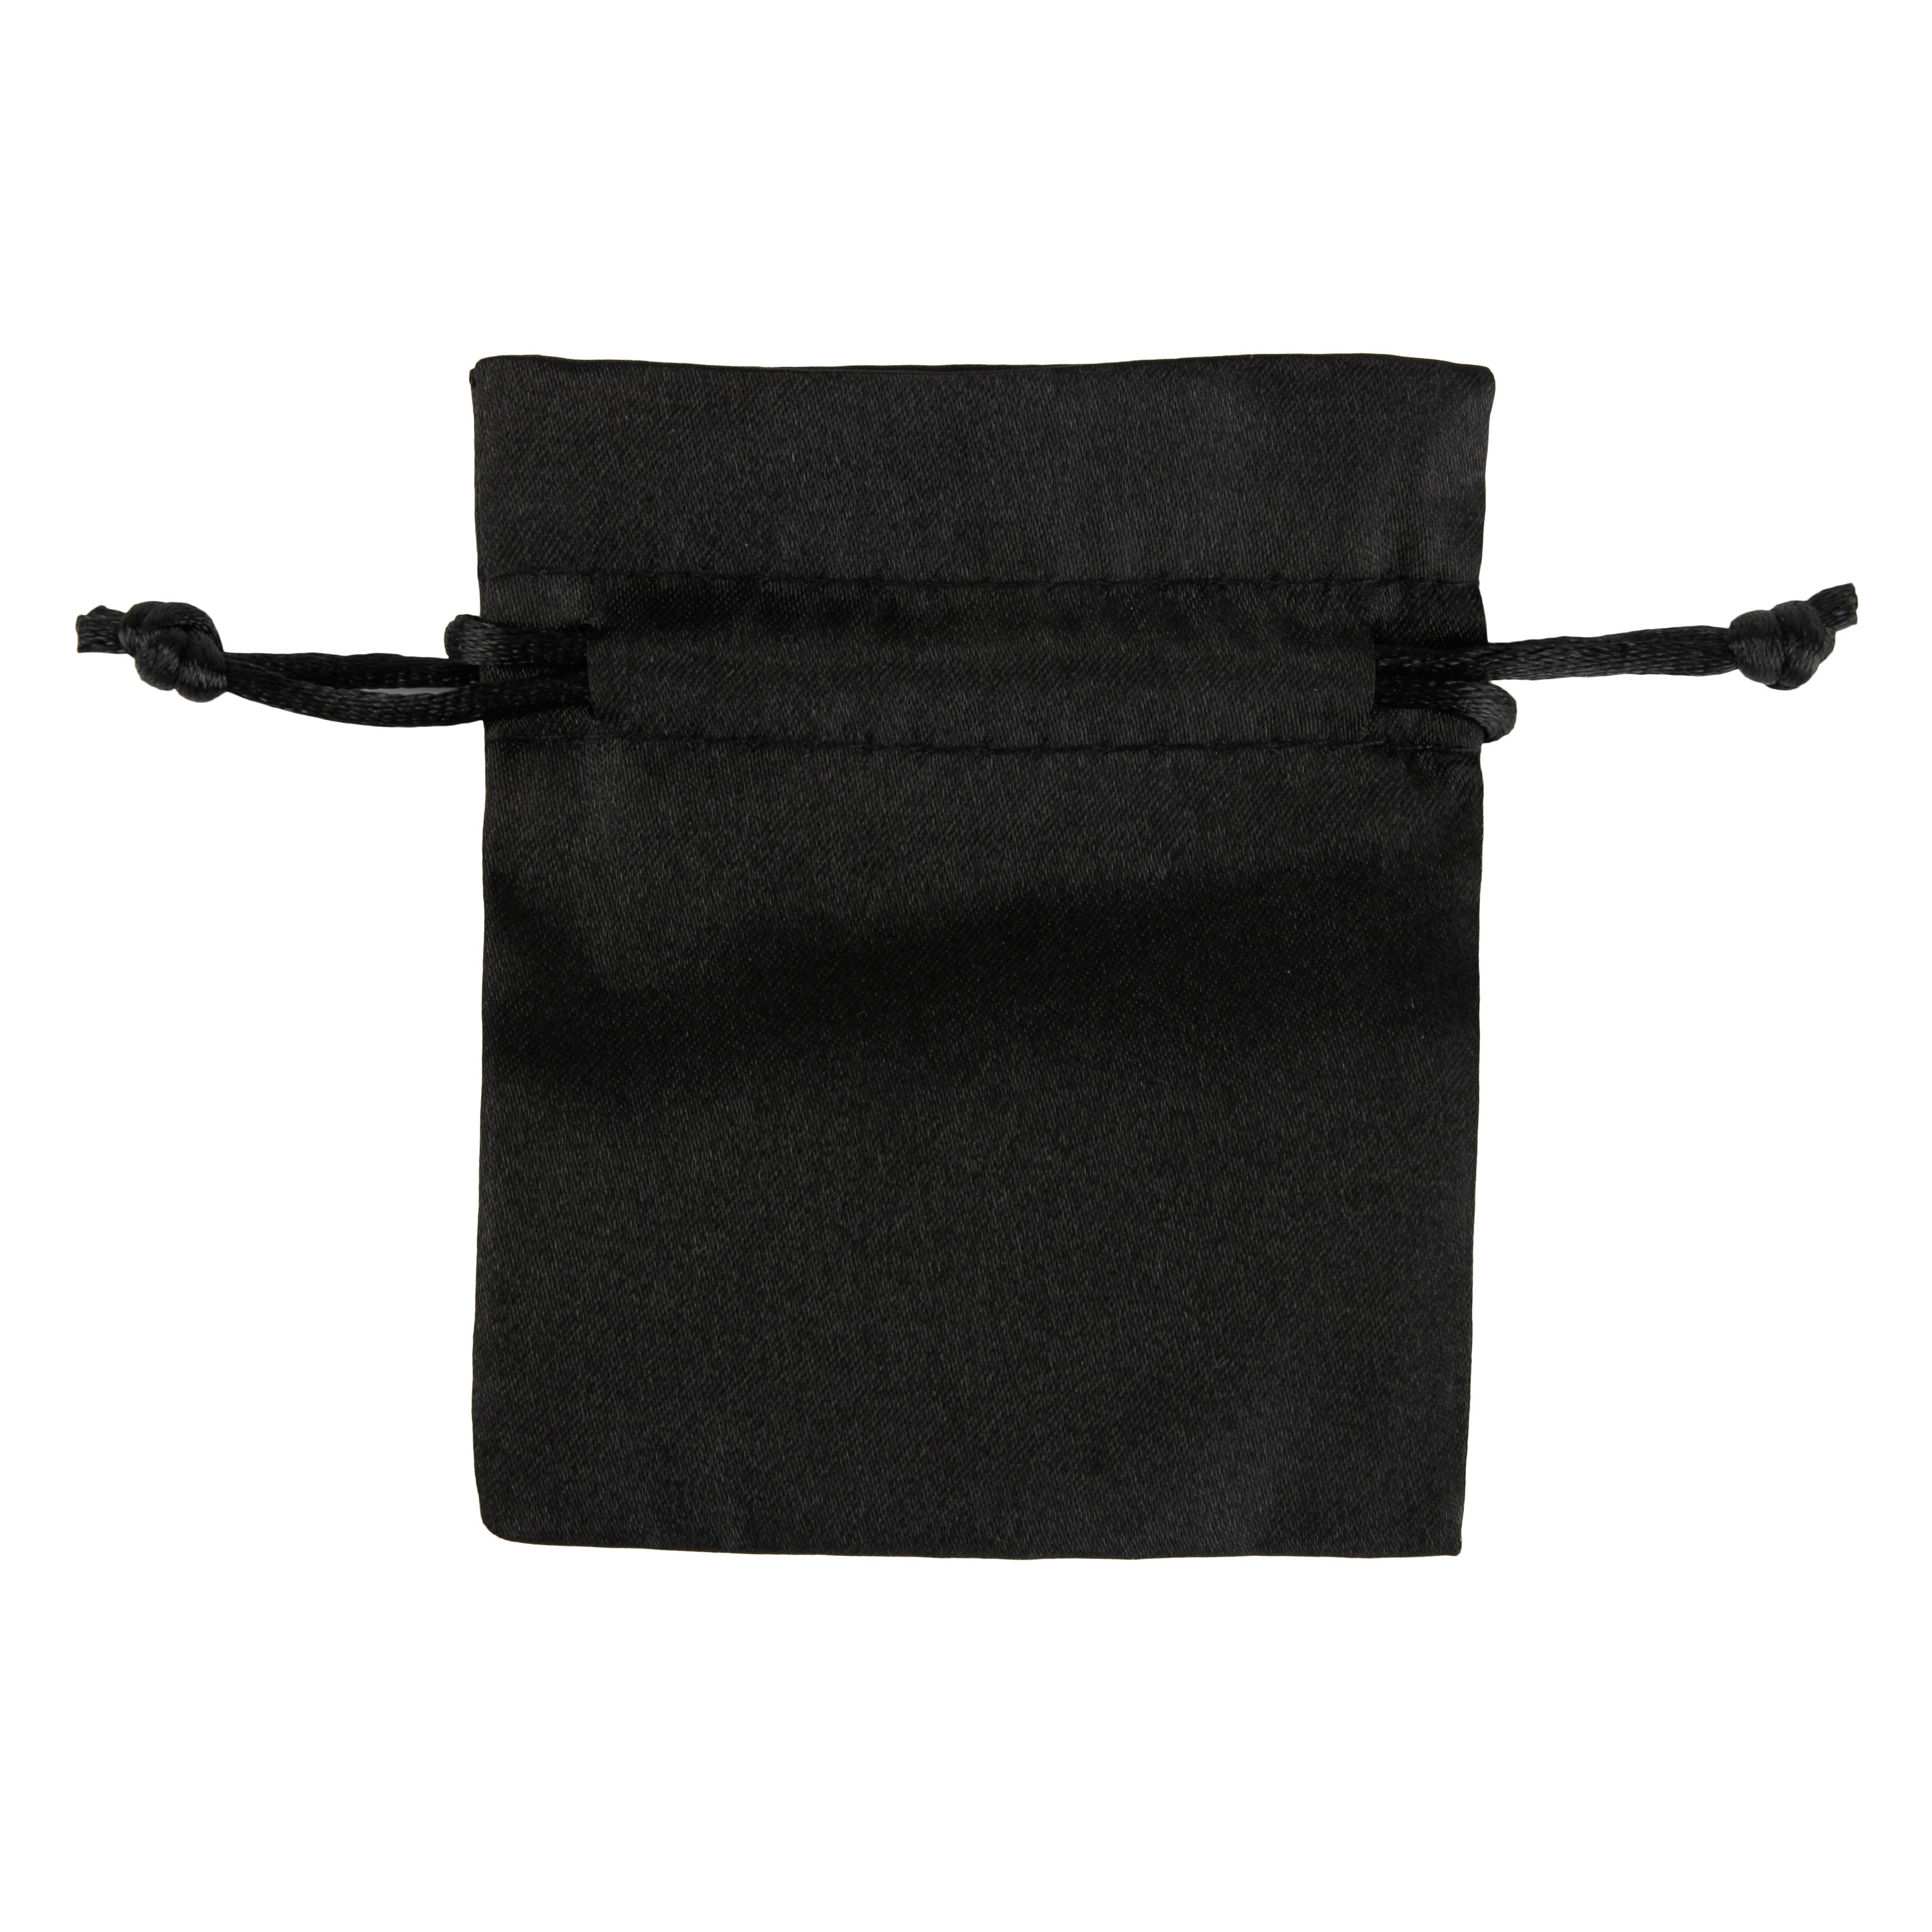 Burchase the Present Bag black by ASMC